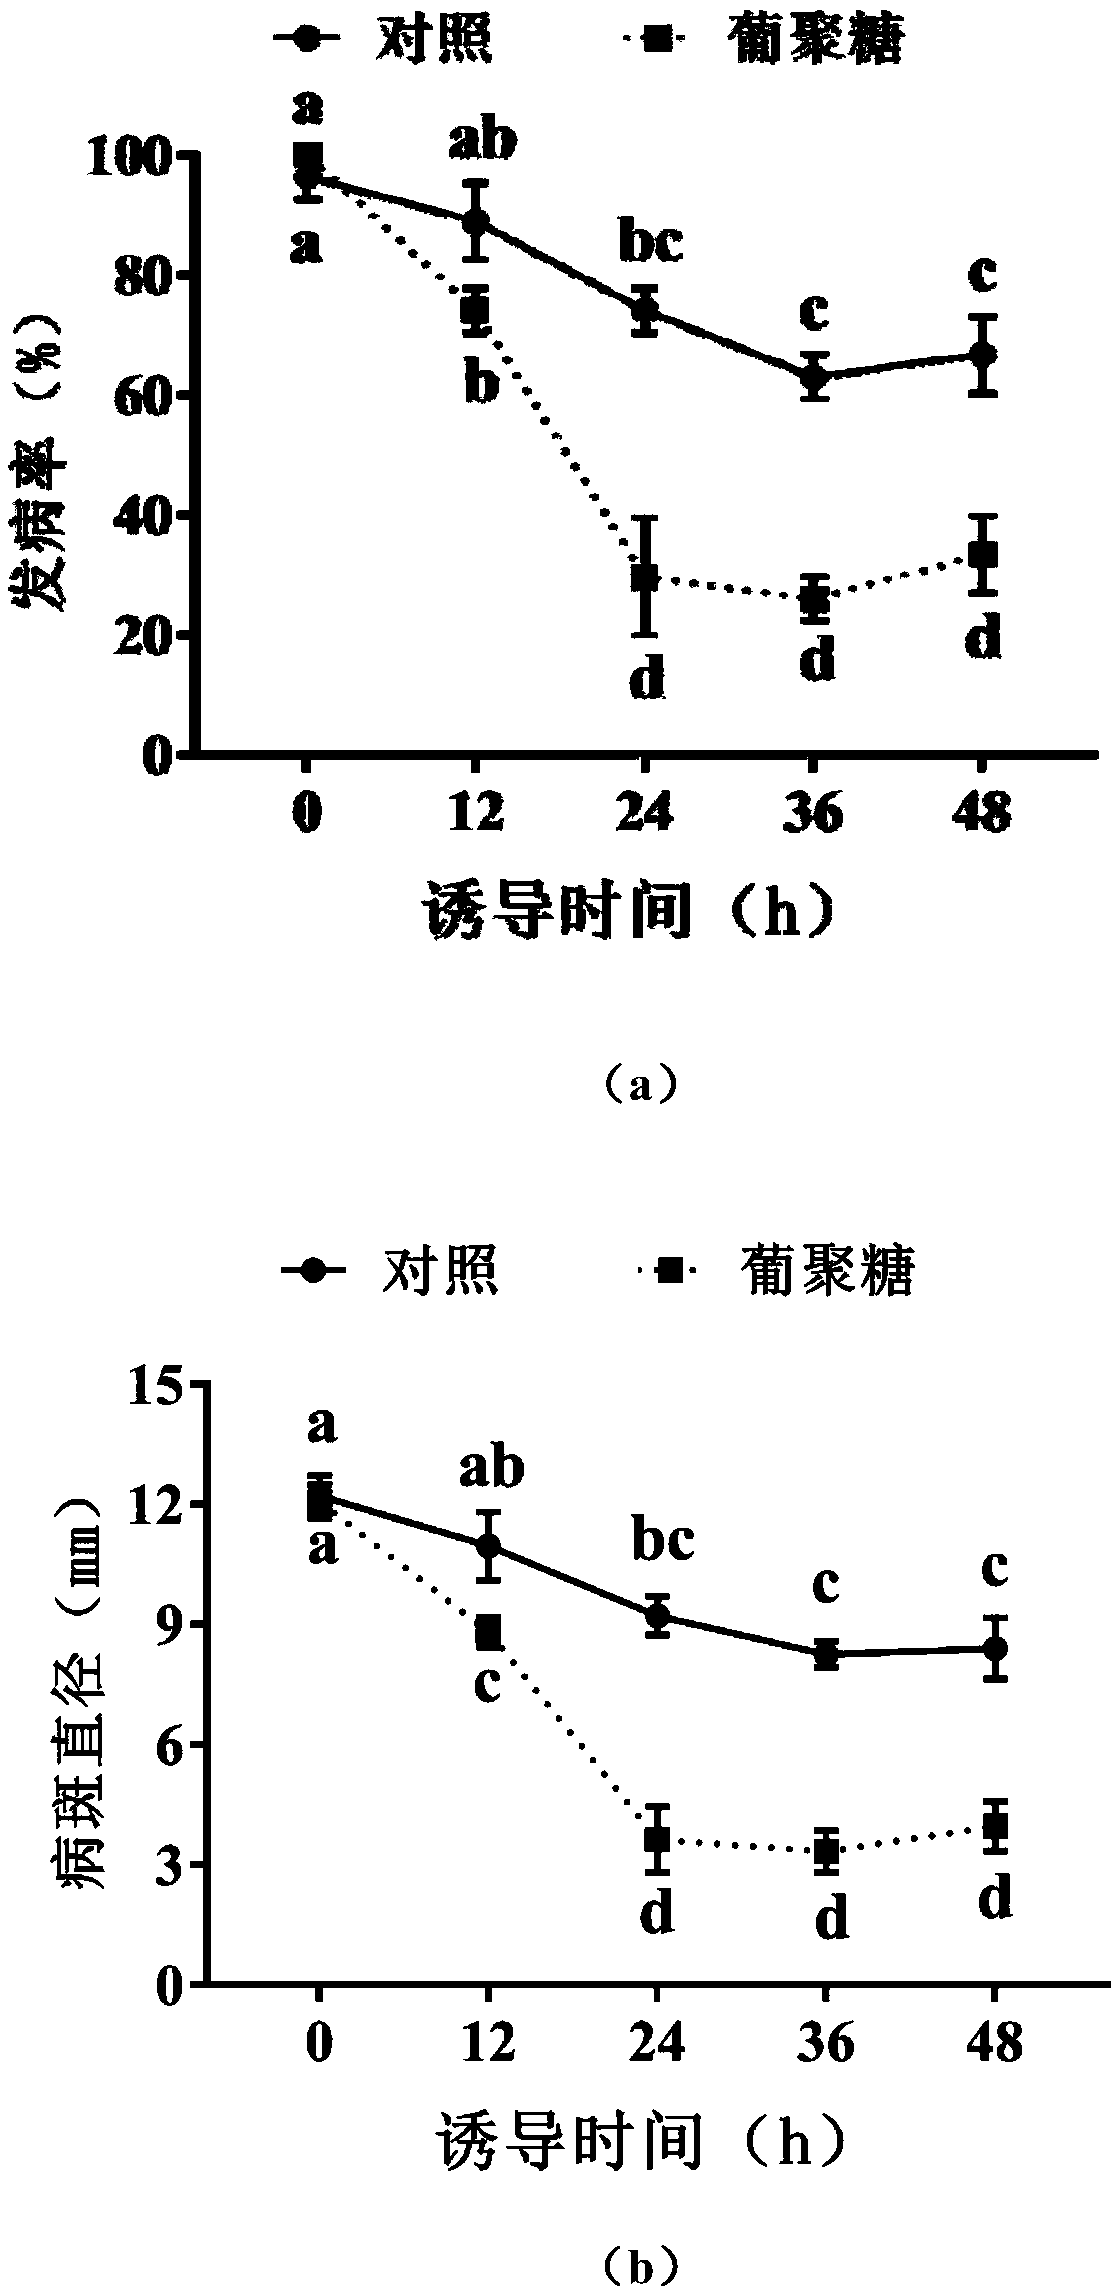 Fruit disease control method based on saccharomyces cerevisiae cell wall product induction activity resistance